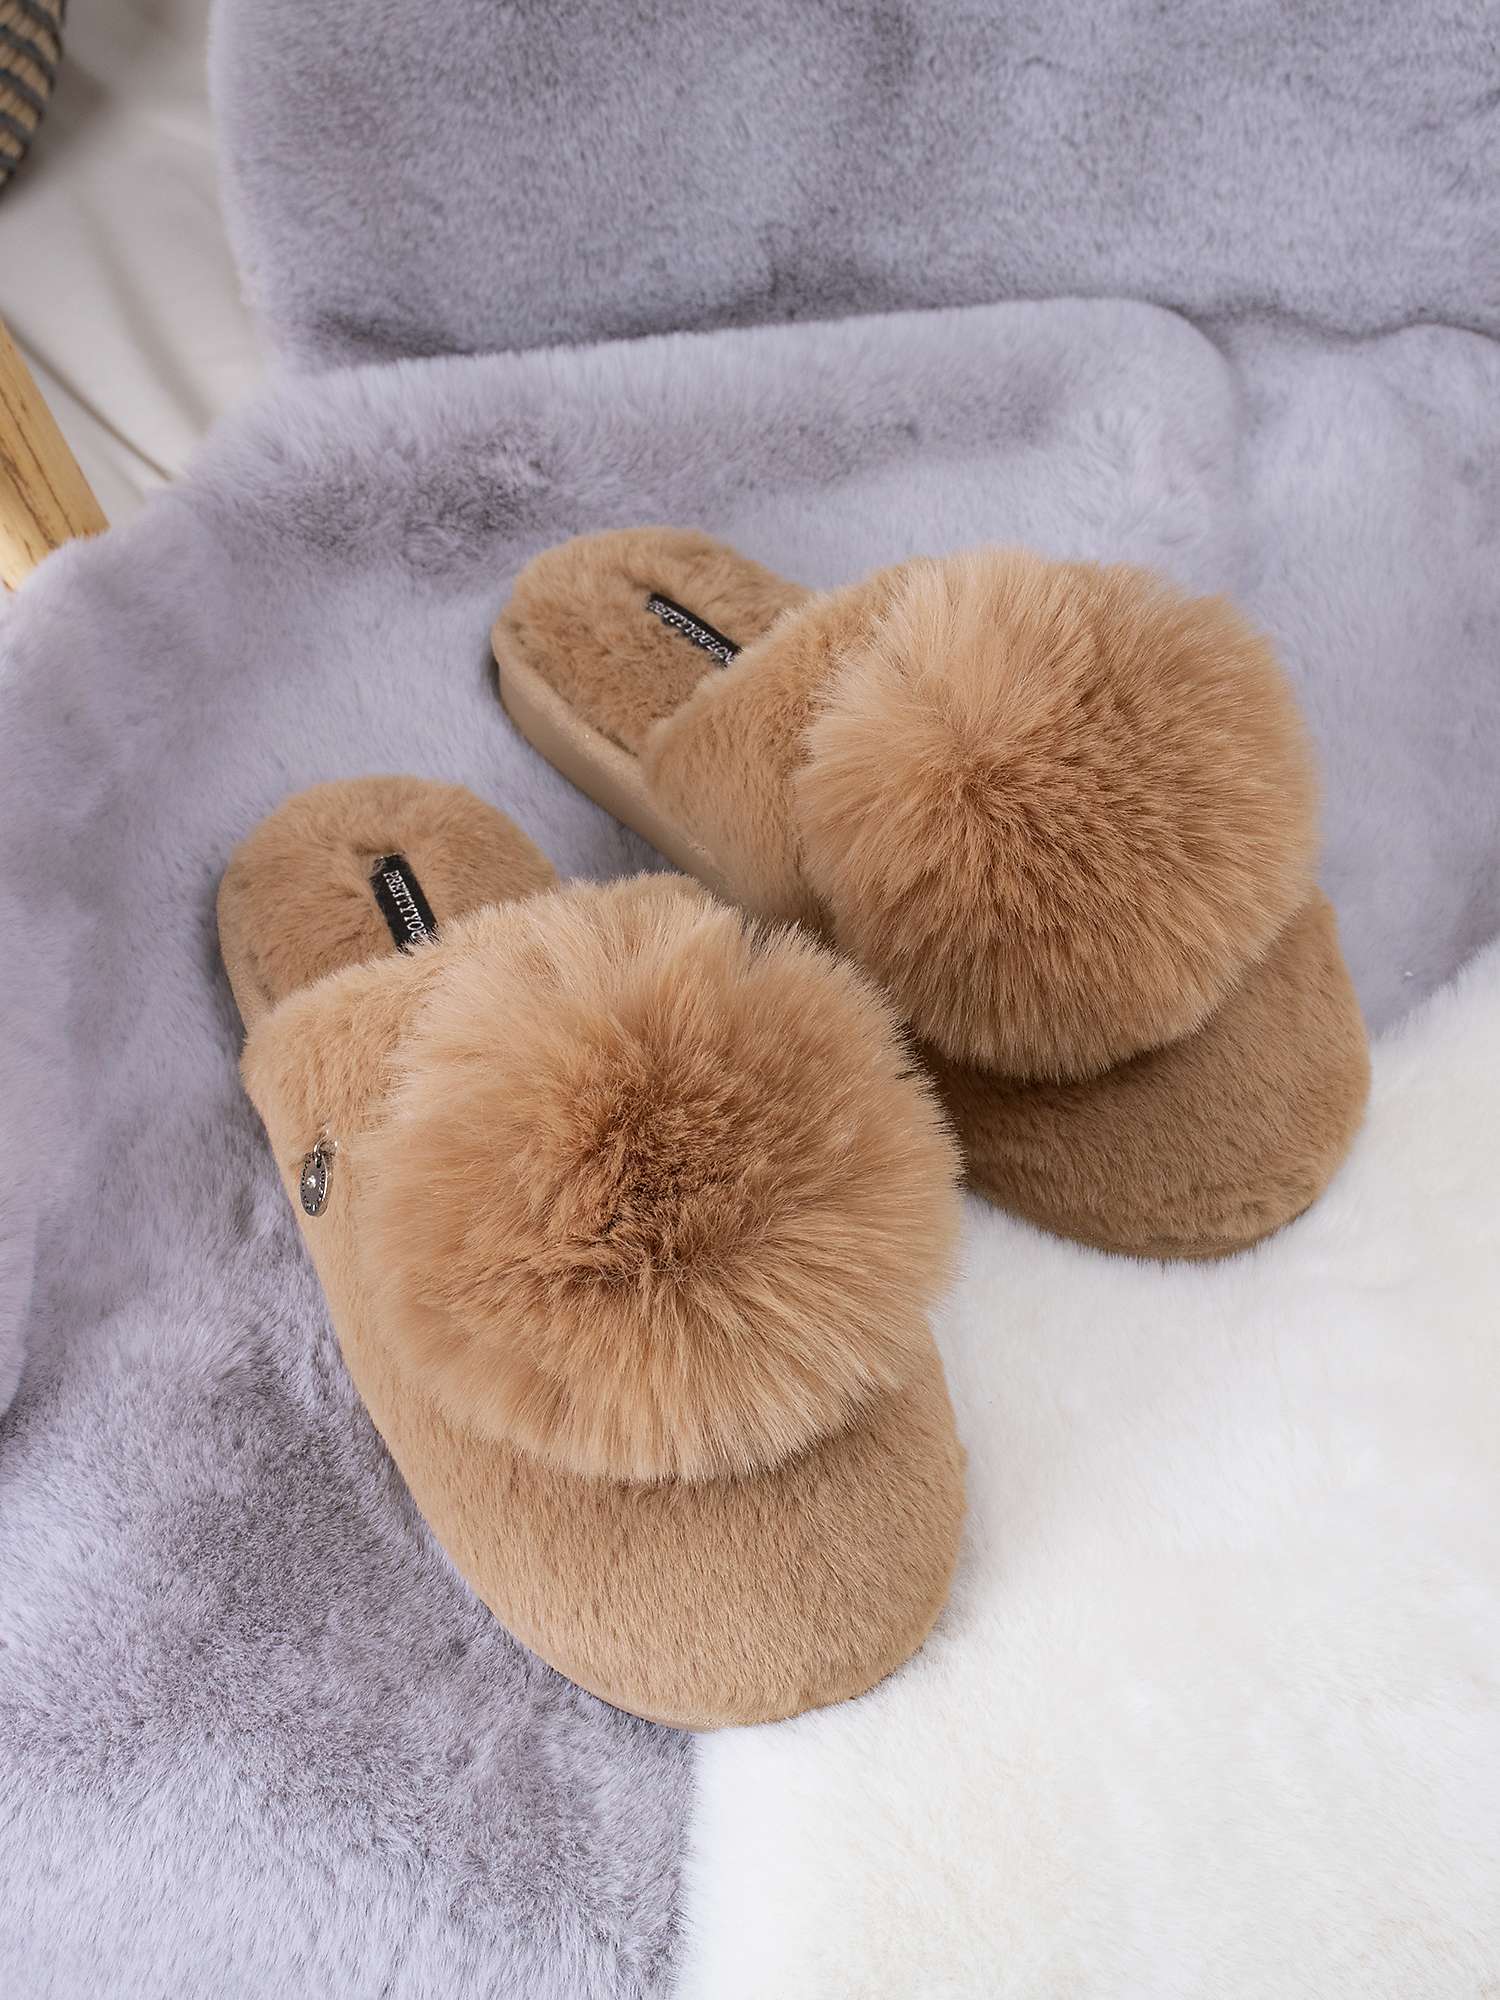 Buy Pretty You London Etta Slippers, Camel Online at johnlewis.com